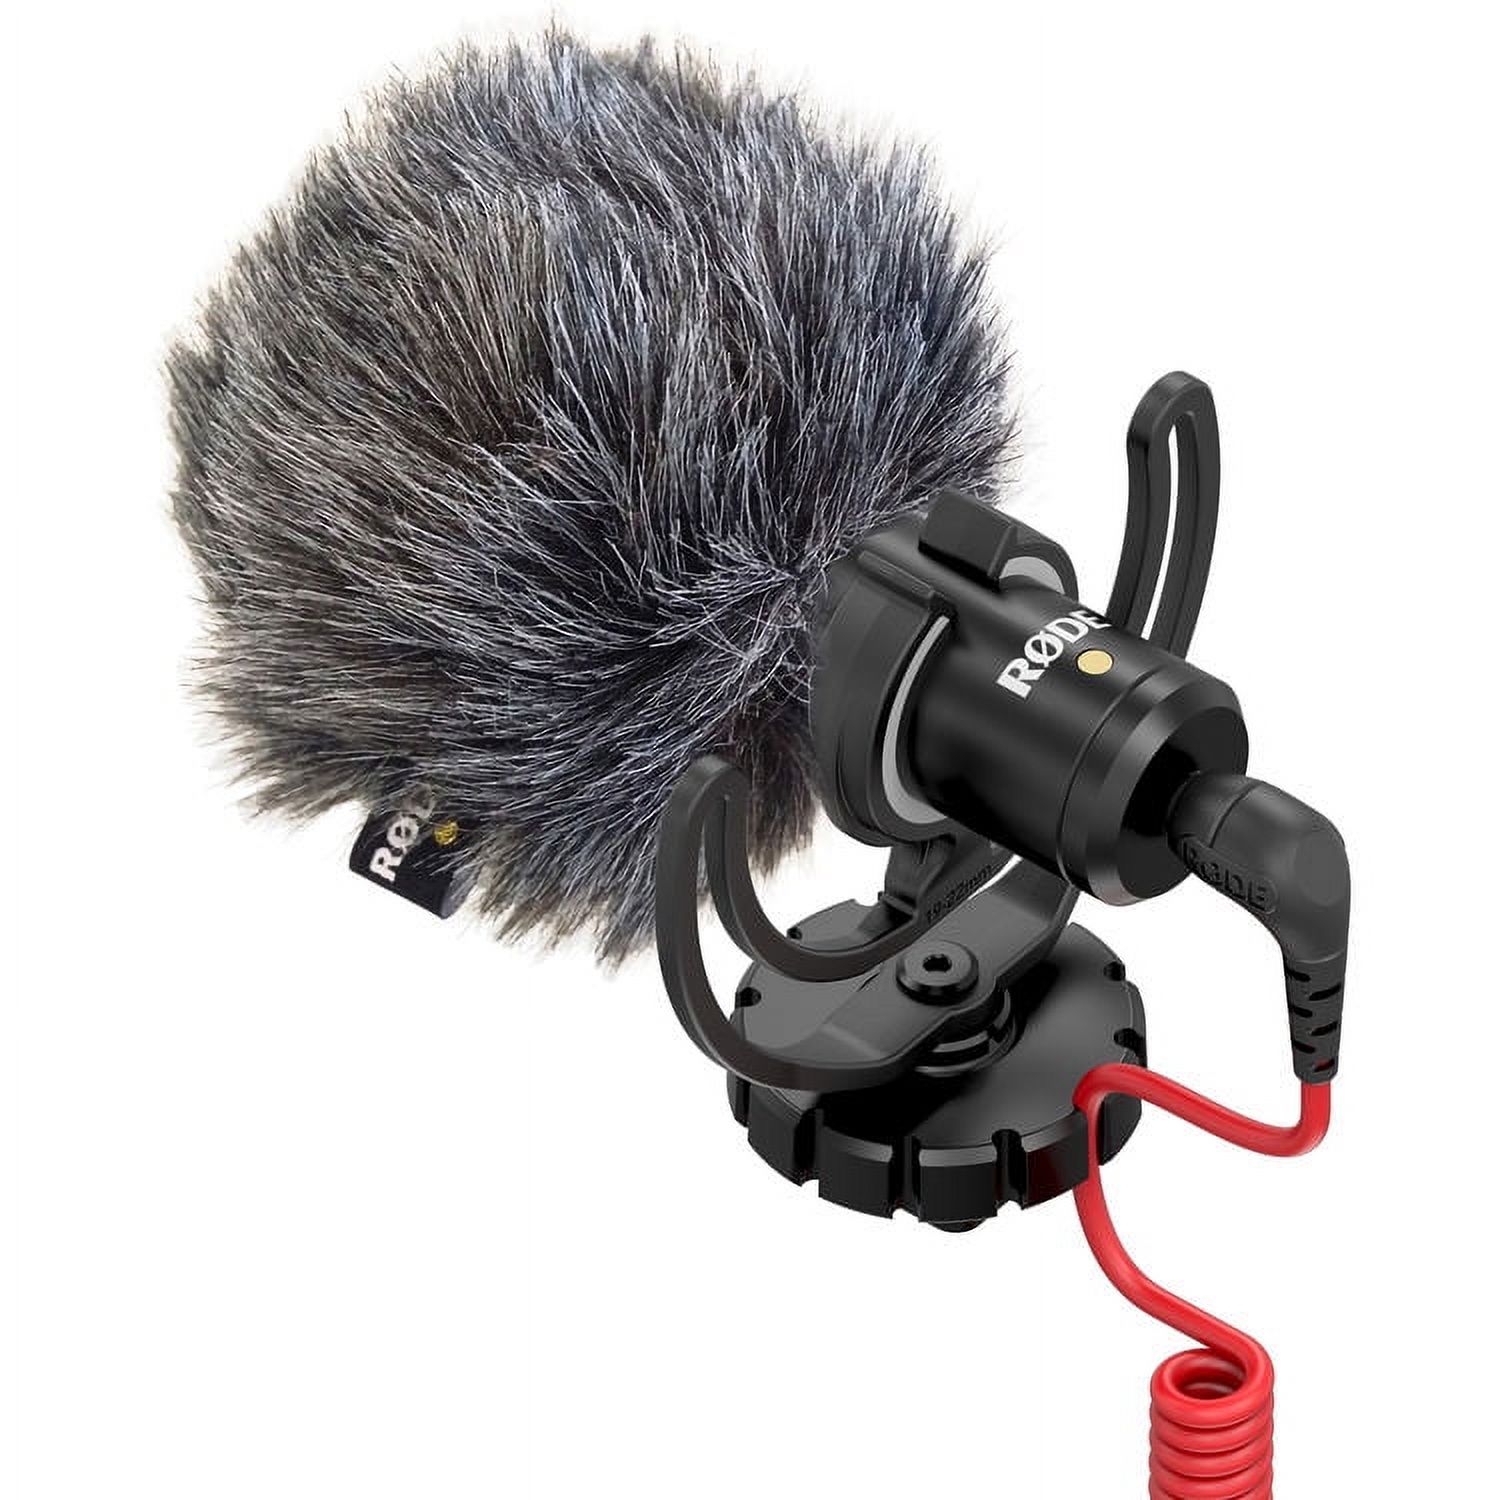 Rode VideoMicro Electret Condenser Microphone - image 3 of 5